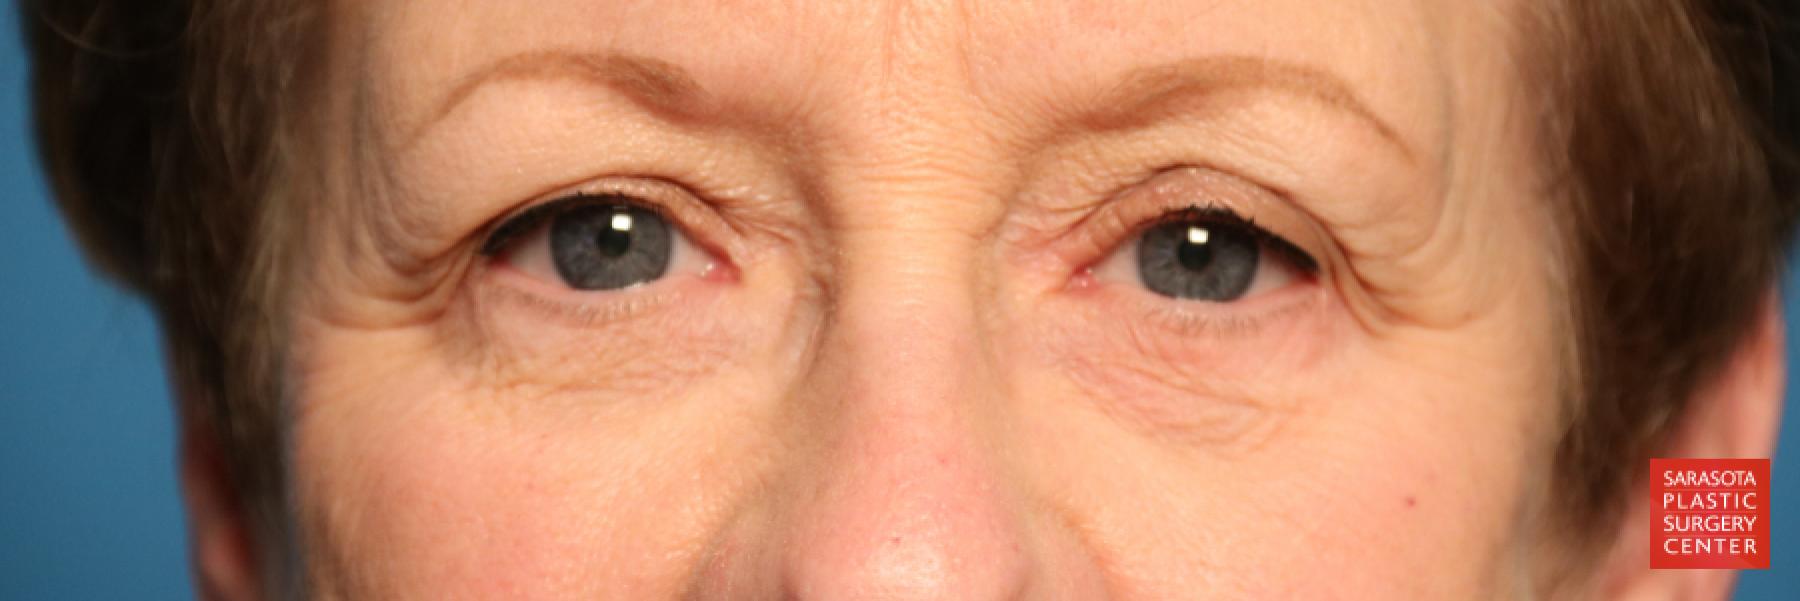 Eyelid Lift: Patient 20 - Before 1